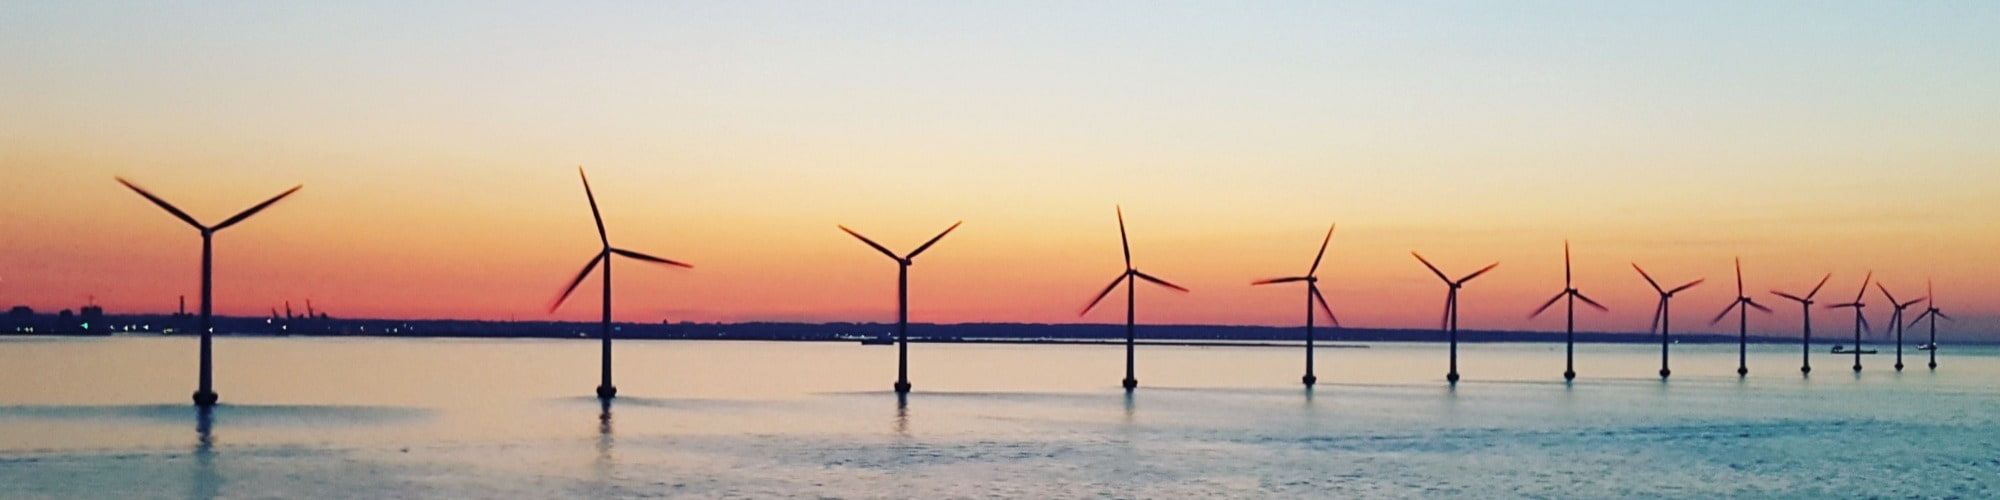 Offshore Wind turbine farm at sunset out at sea at sunset